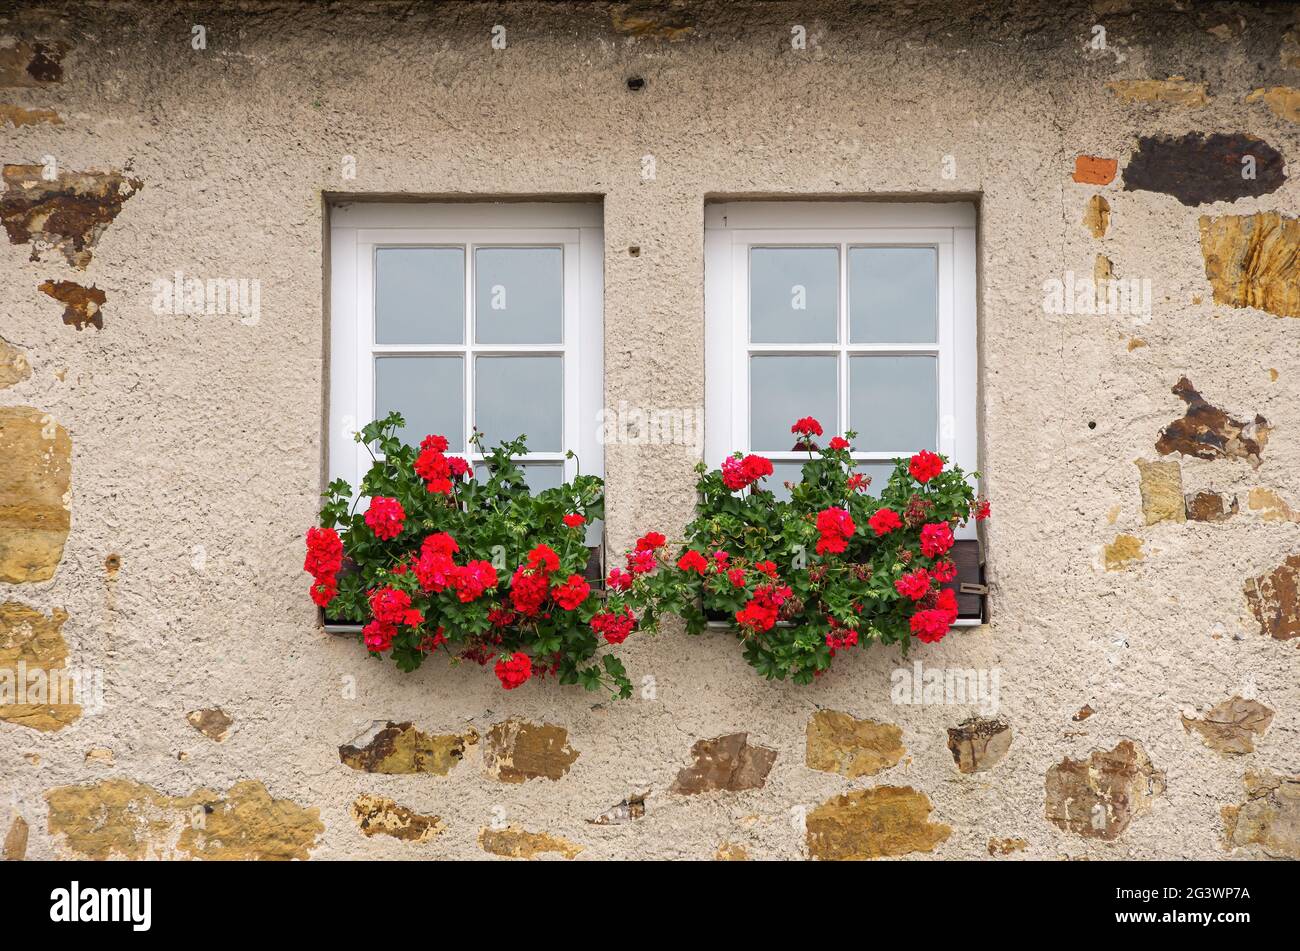 Symbolic image: Two windows with planters full of red flowers. Stock Photo